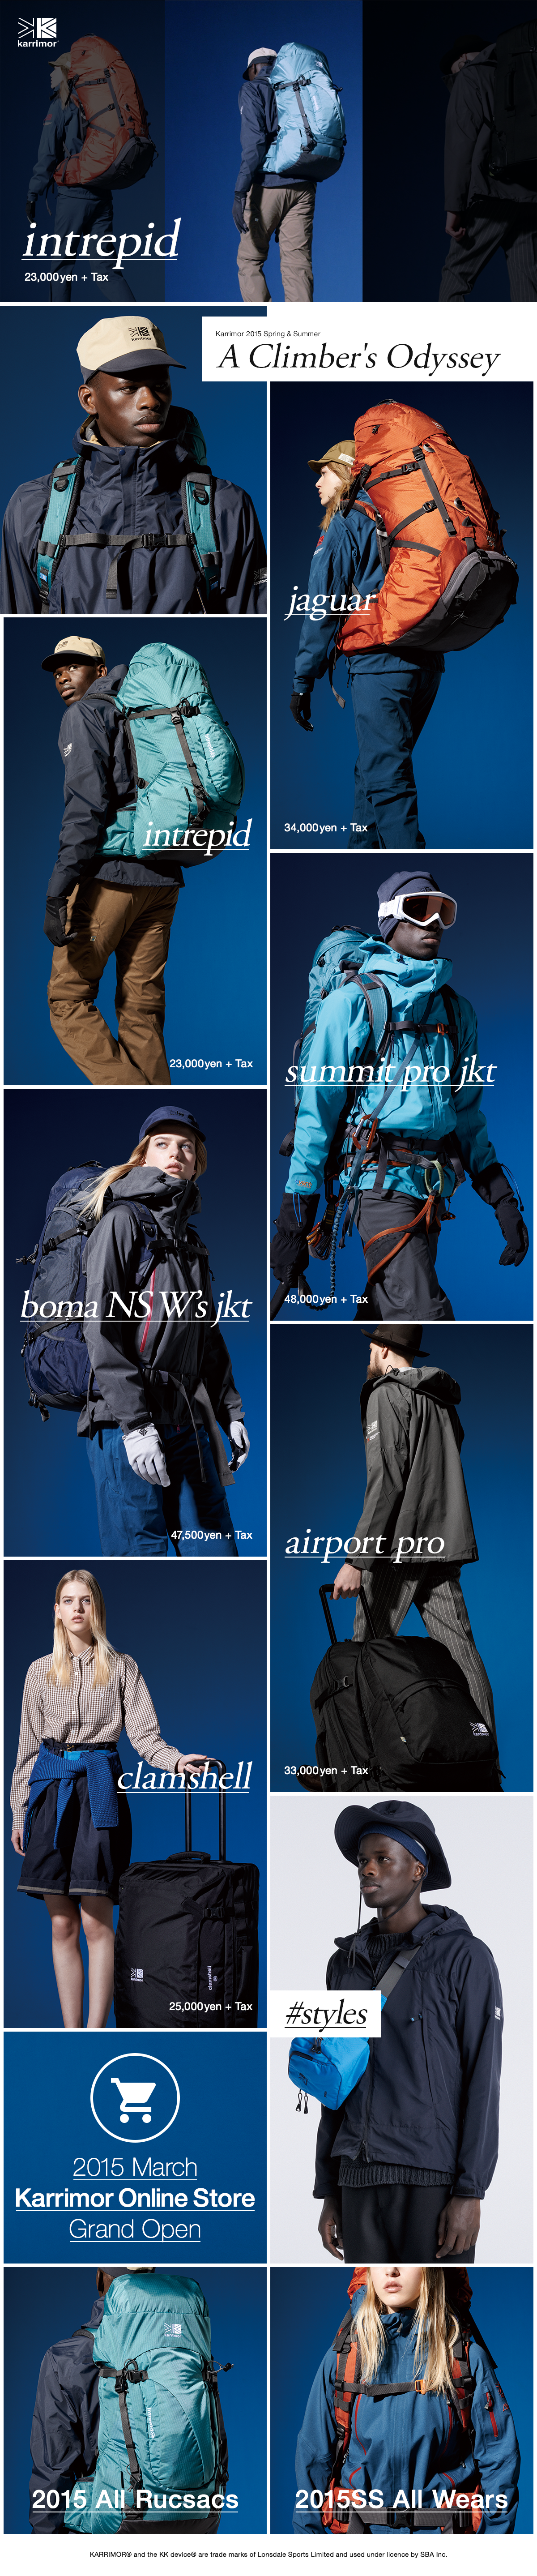 http://www.houyhnhnm.jp/news/images/02_2015SS.png